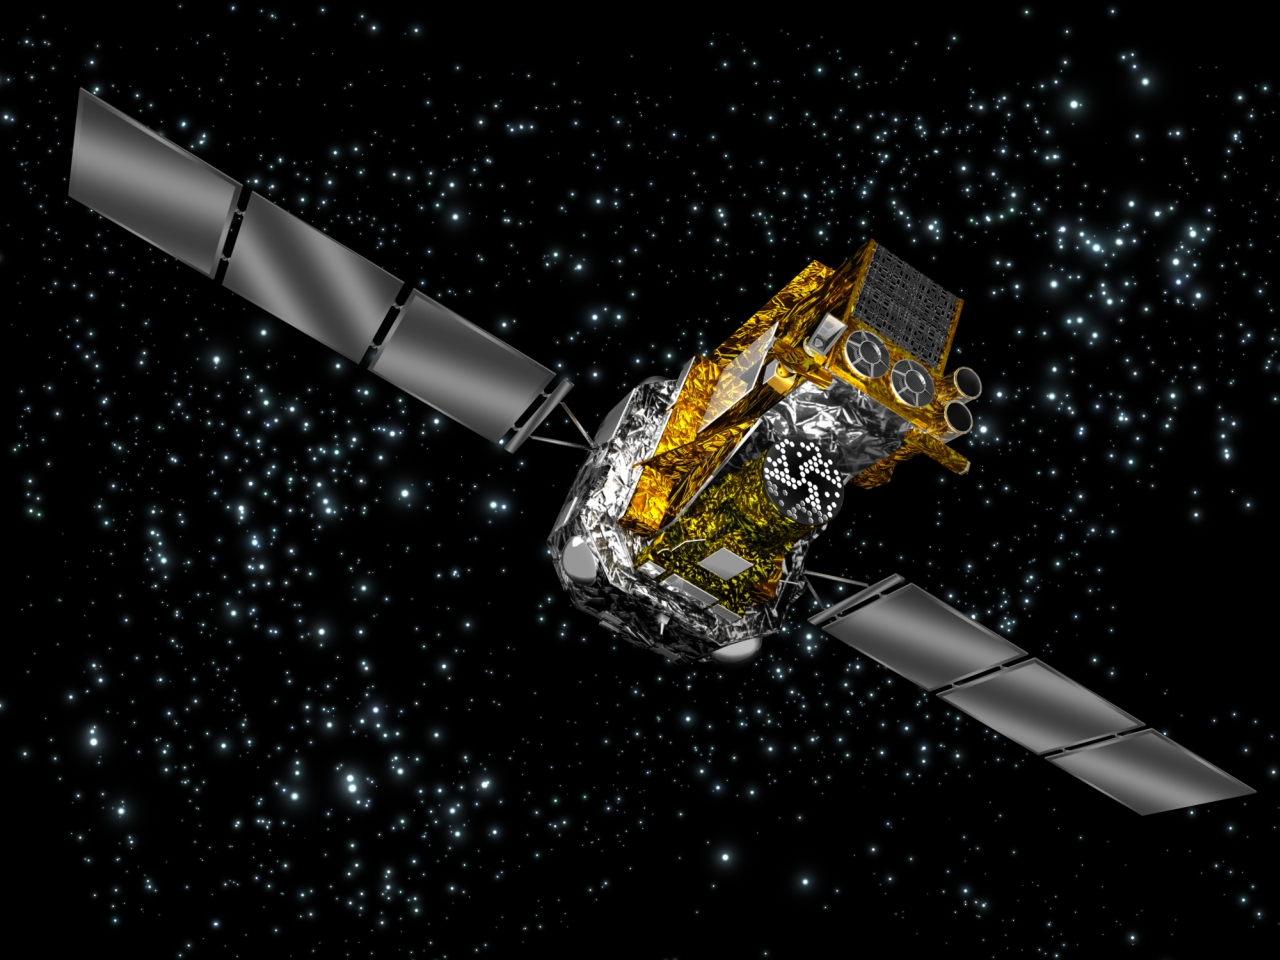 An artist's impression of the INTEGRAL spacecraft in space.